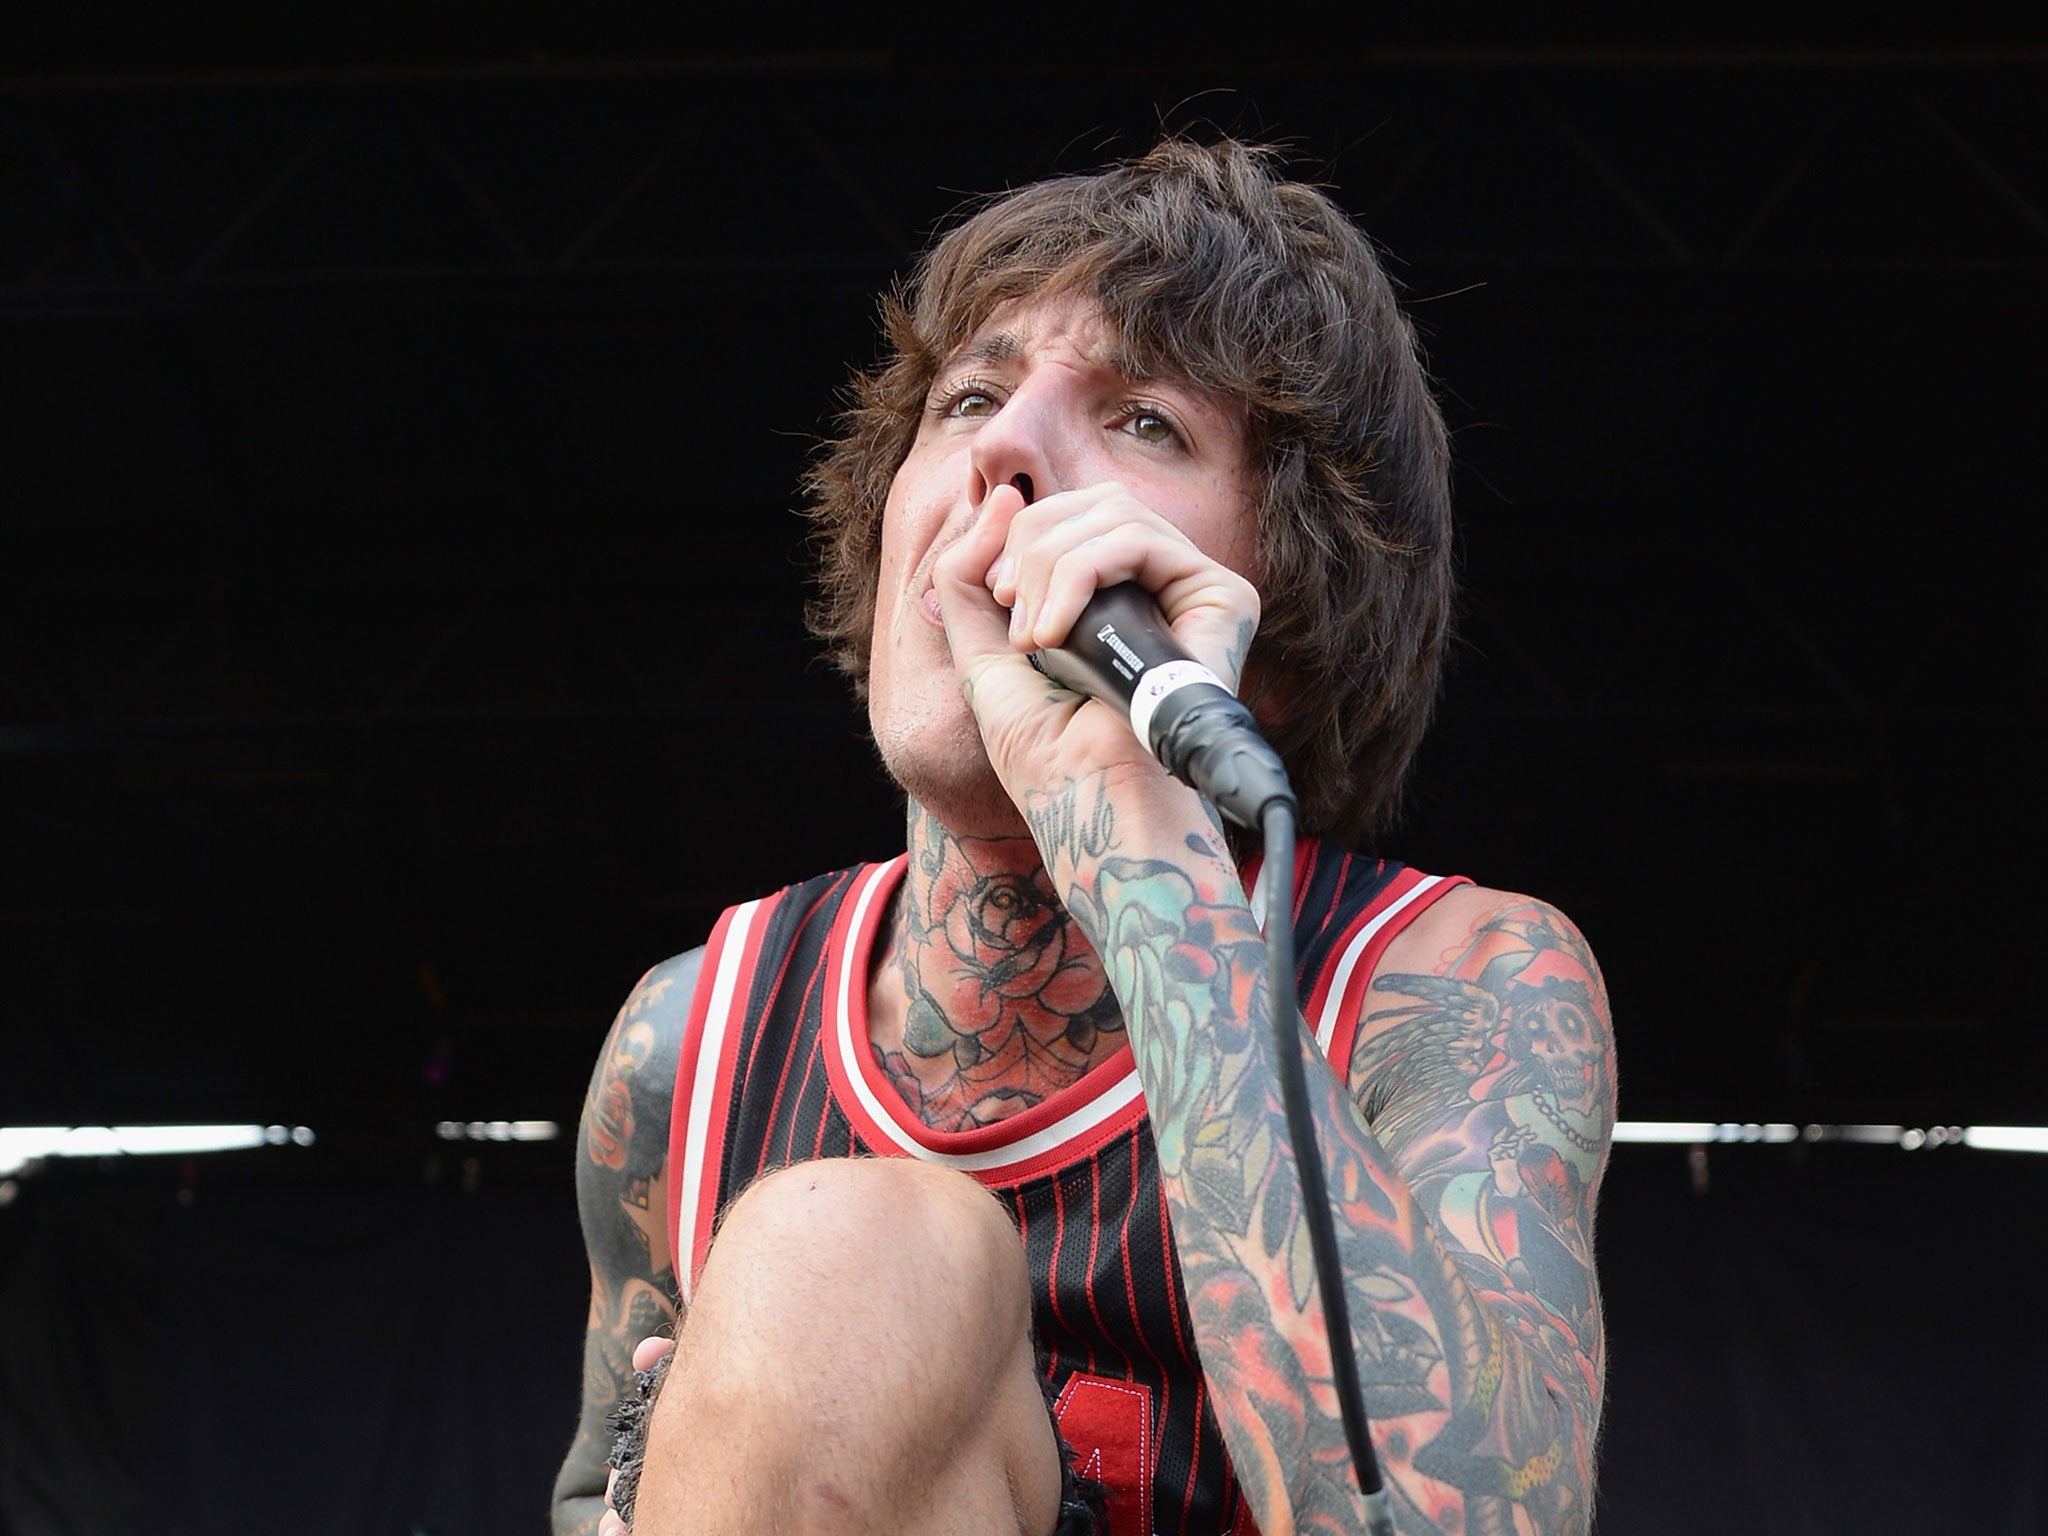 Oli Sykes of Bring Me the Horizon described the troubles he went through prior to writing 'Sempiternal'